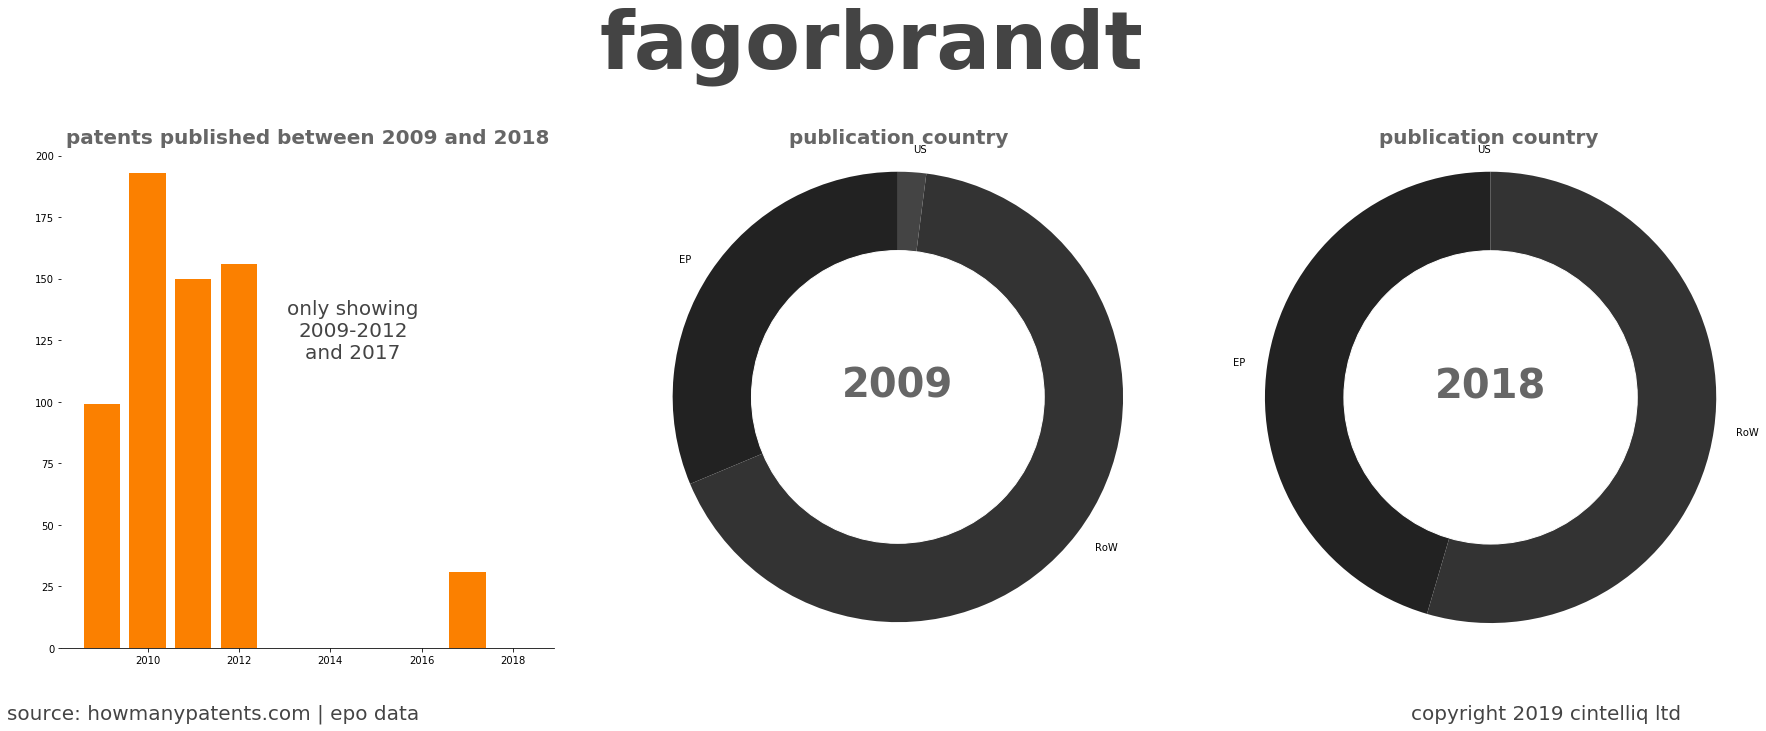 summary of patents for Fagorbrandt